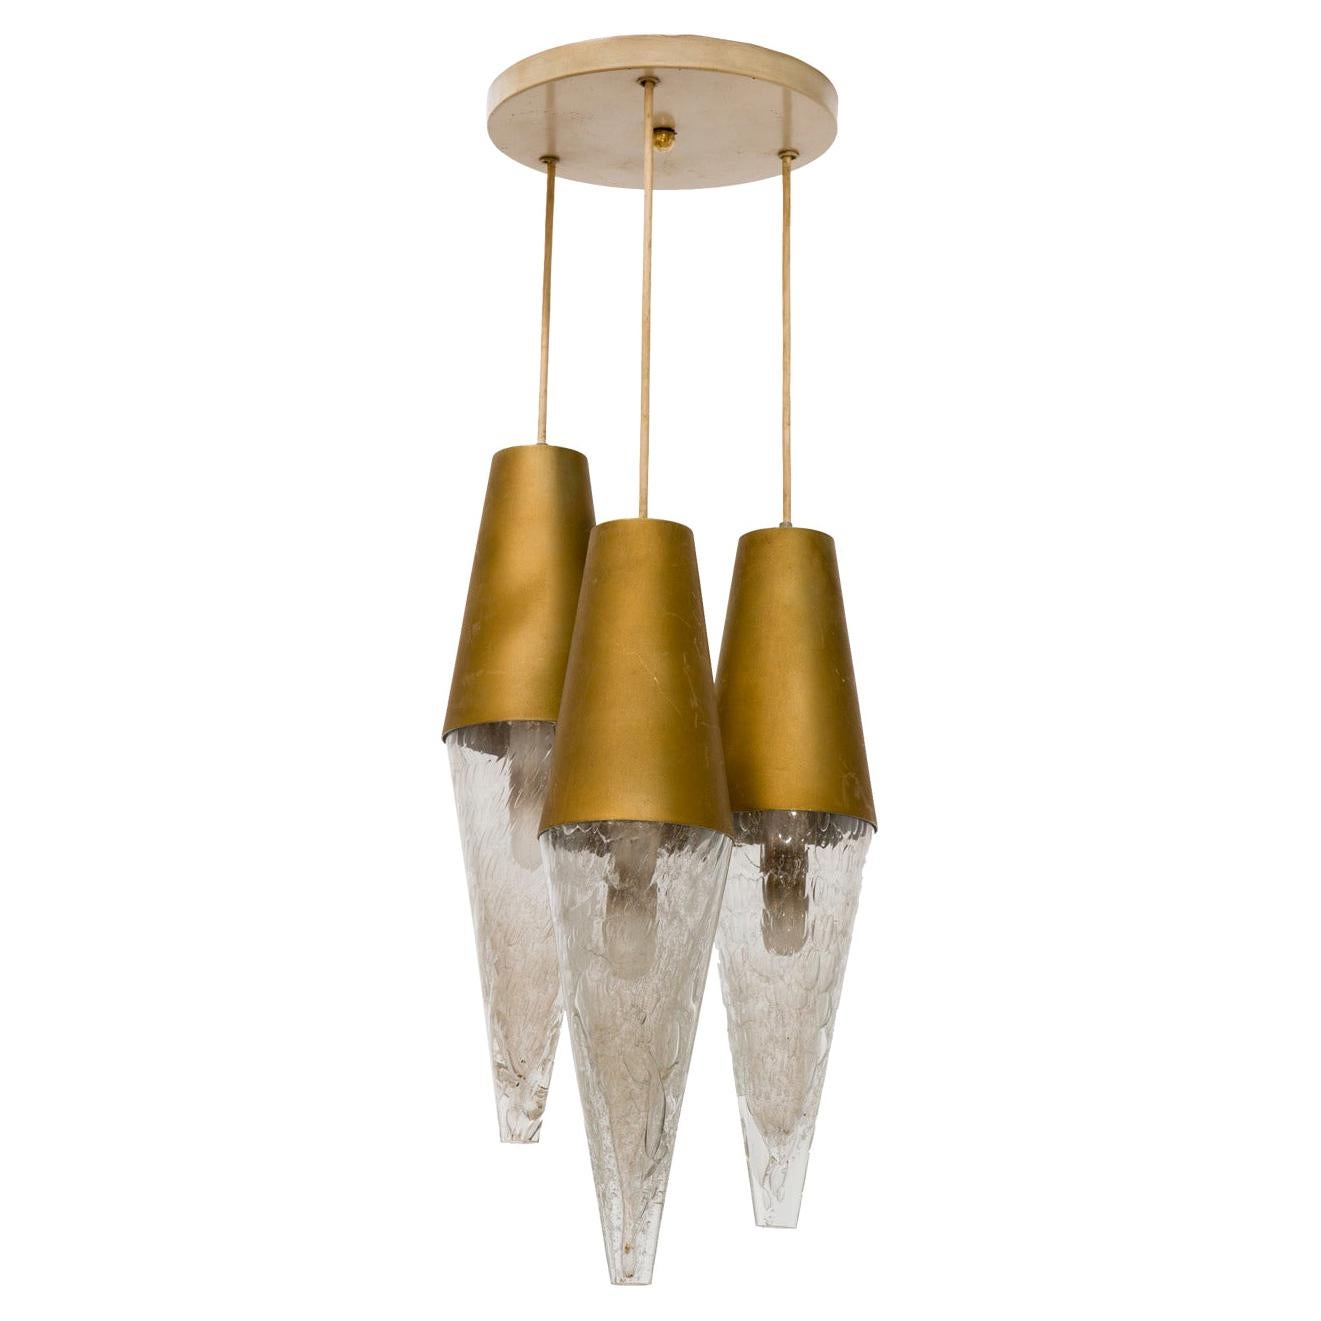 German Midcentury Staggered Pendant Fixture For Sale